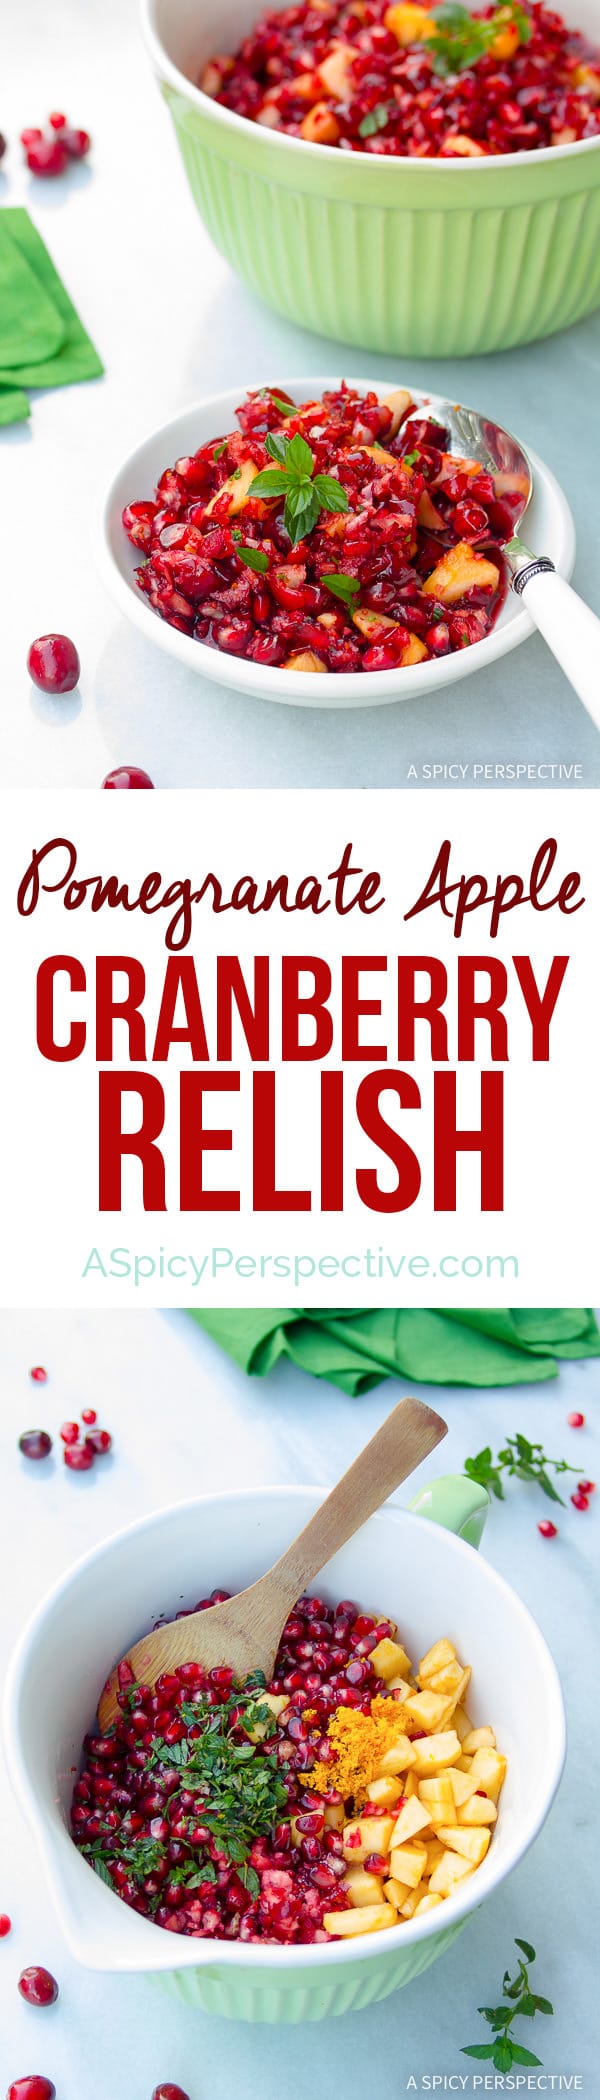 A Must-Make for Thanksgiving - Pomegranate Apple Cranberry Relish on ASpicyPerspective.com 